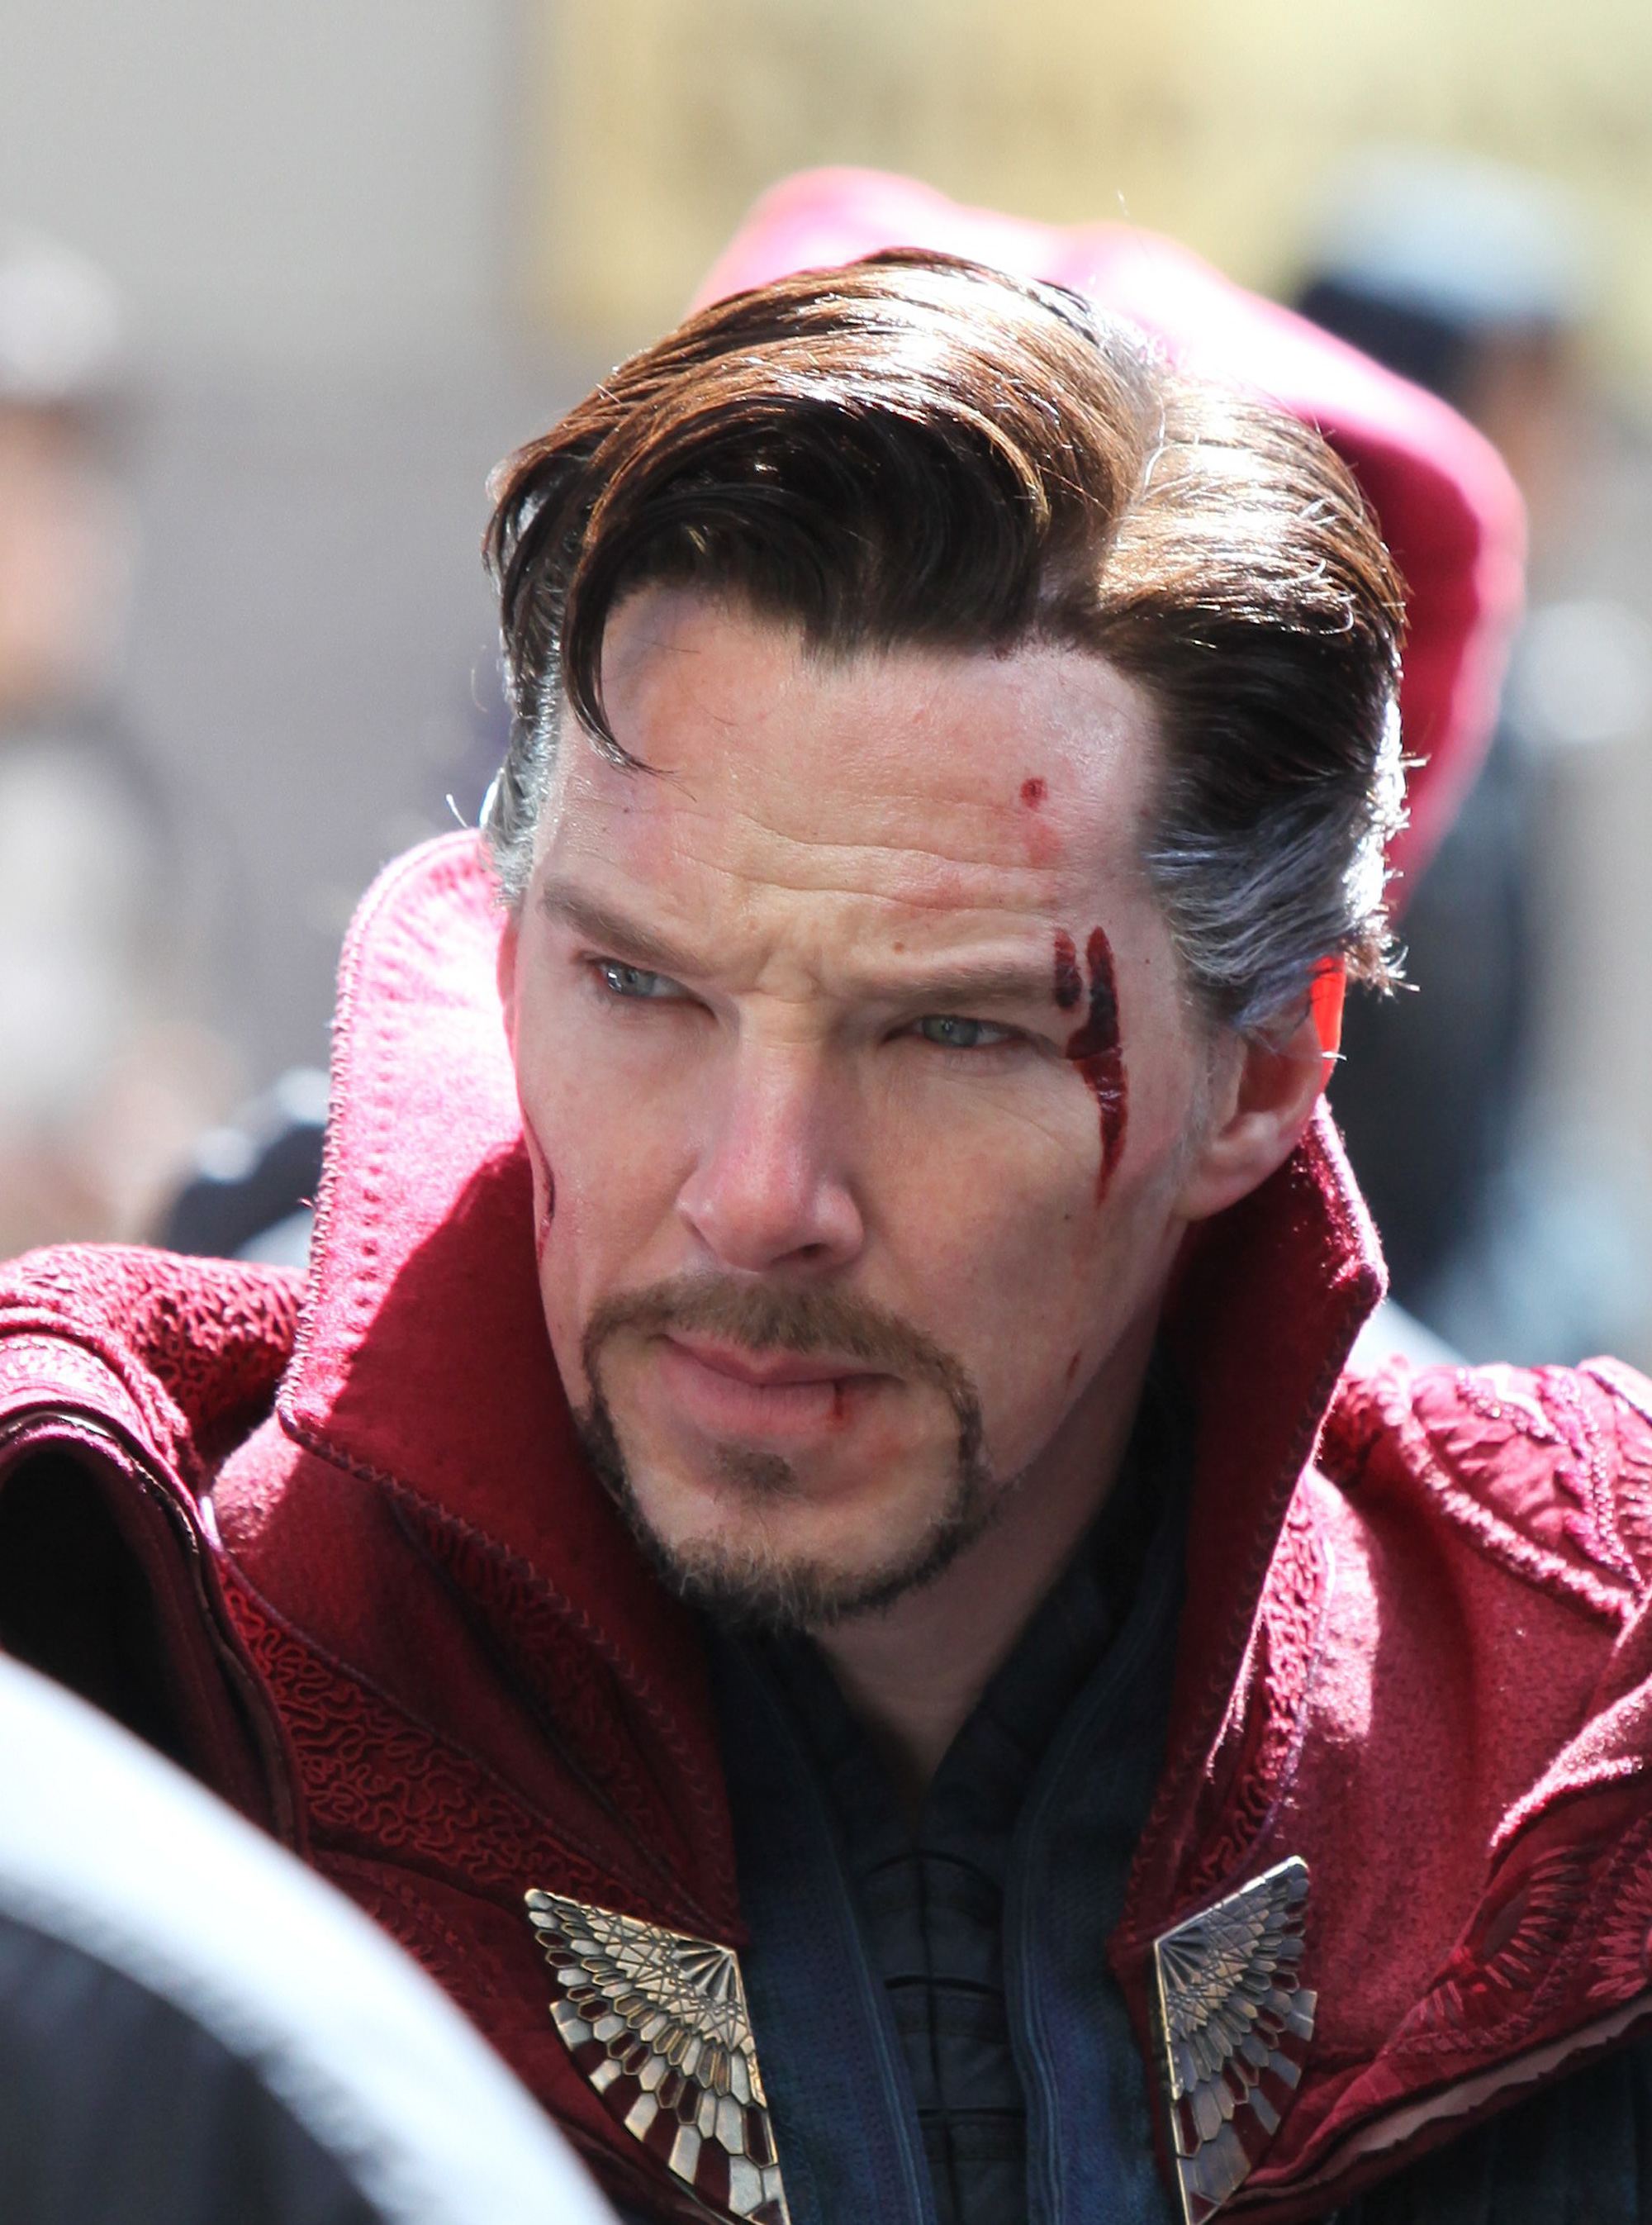 Behind The Scenes Photos From Benedict Cumberbatch's New Film - Woman